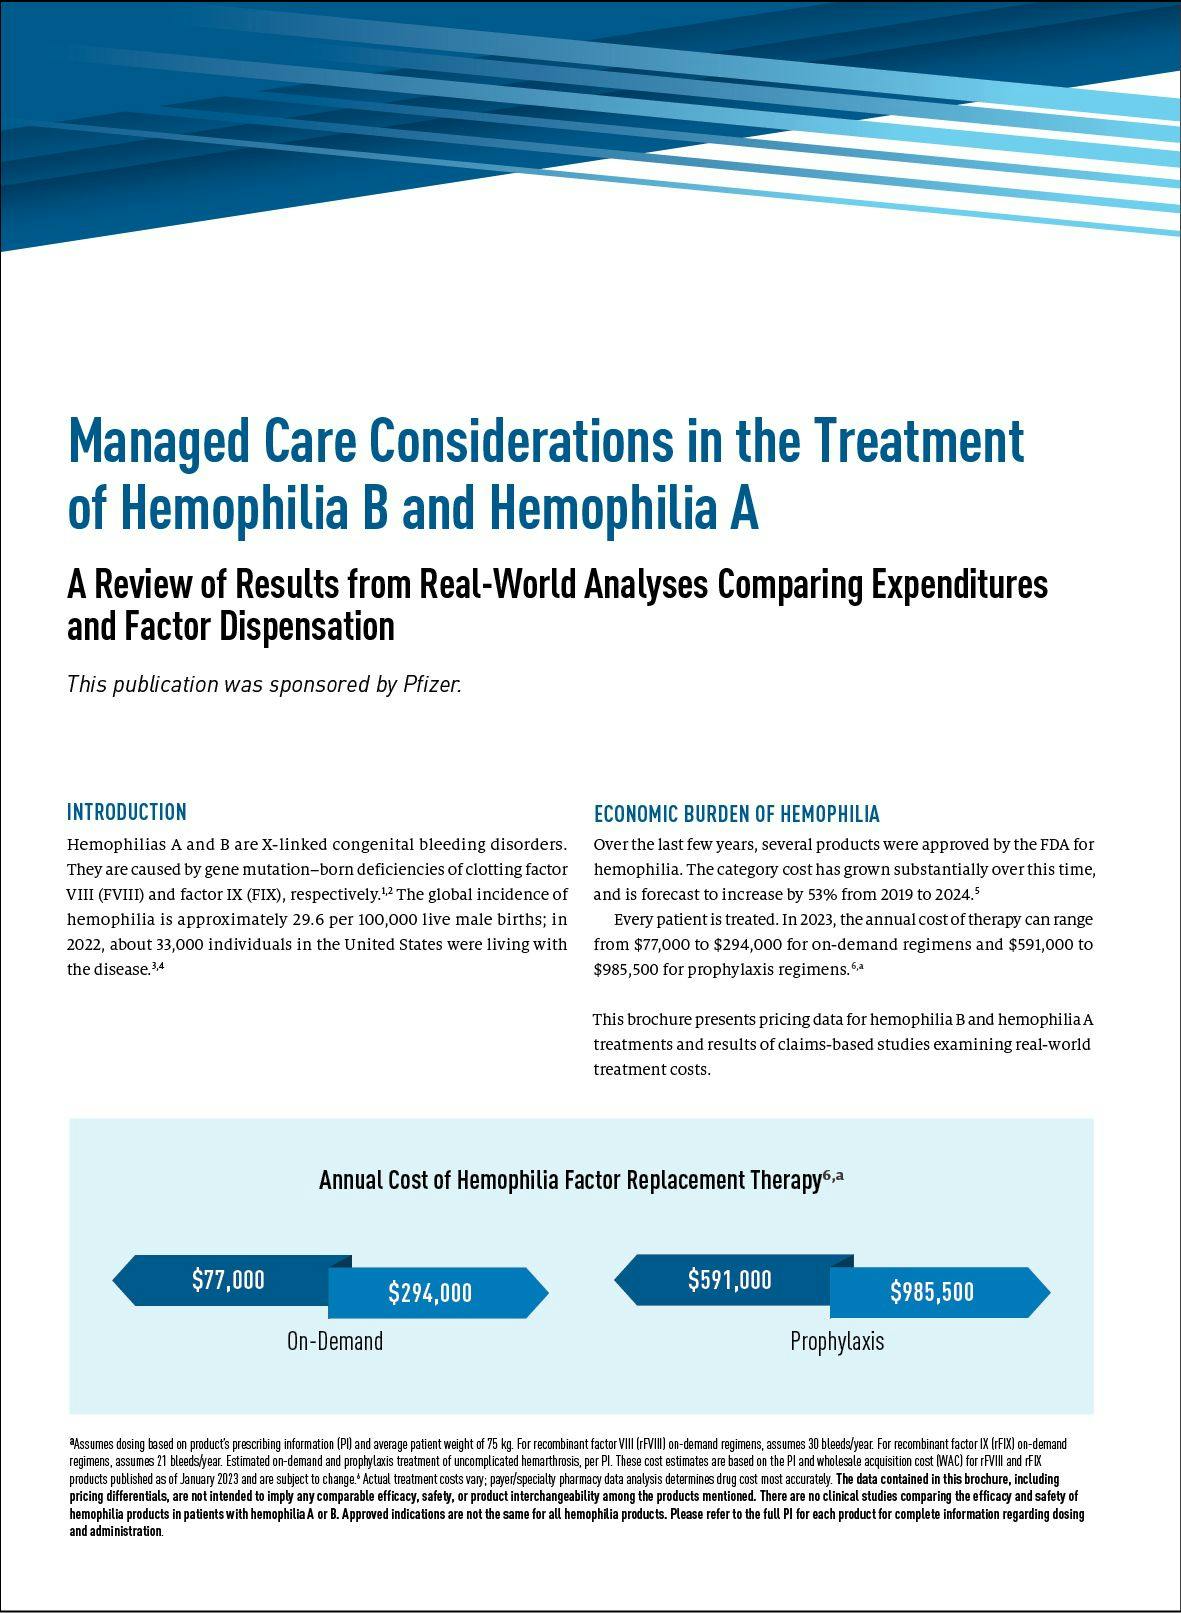 Managed Care Considerations in the Treatment of Hemophilia B and Hemophilia A: A Review of Results from Real-World Analyses Comparing Expenditures and Factor Dispensation